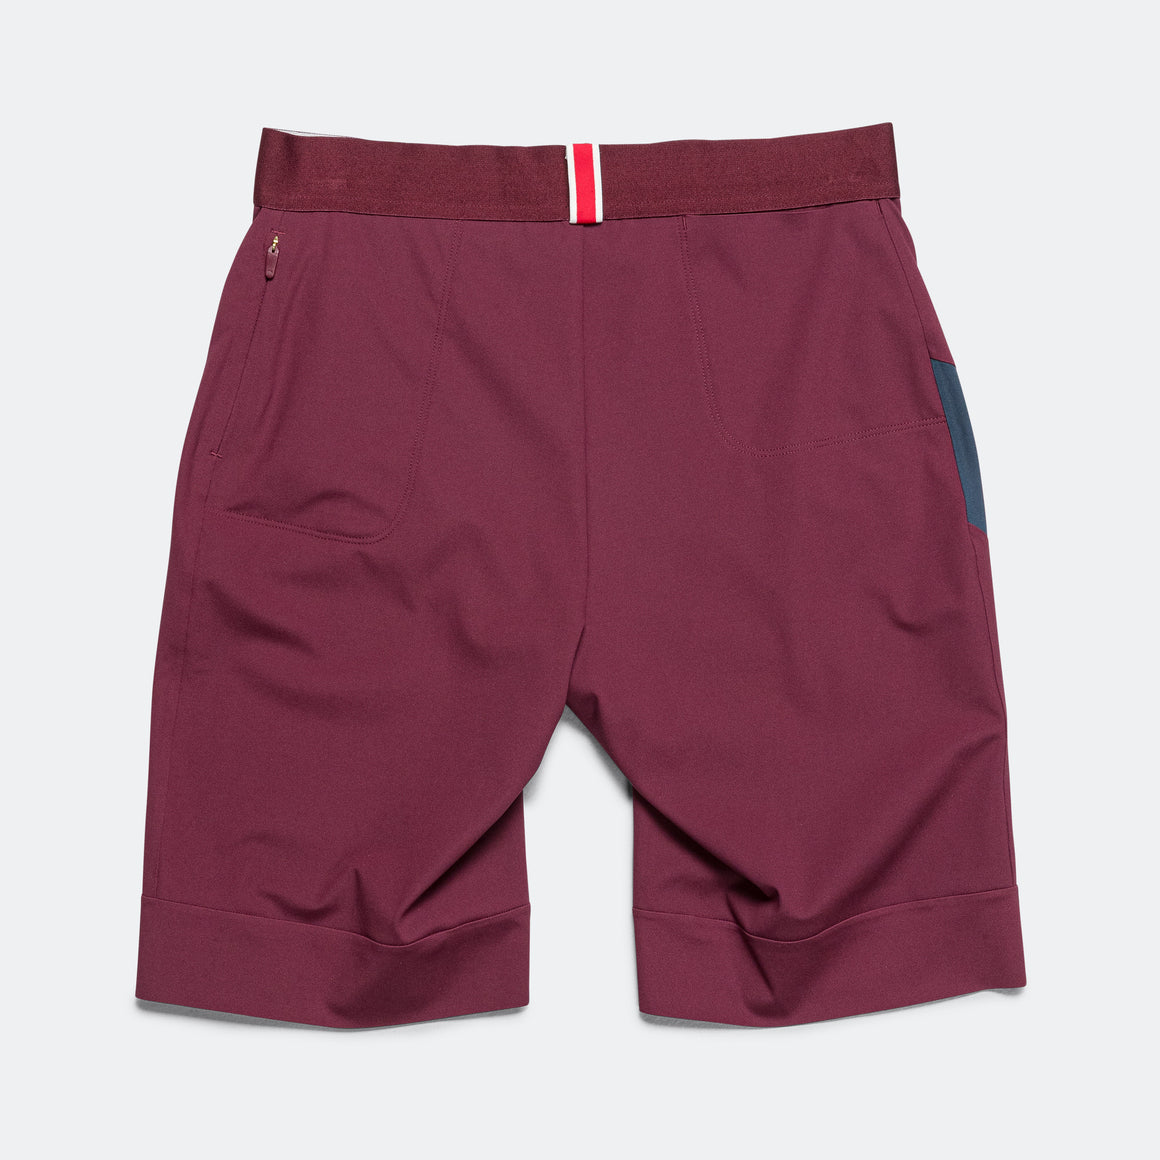 Tracksmith - Mens Allston Half Tights Lined - Berry/Midnight - Up There Athletics